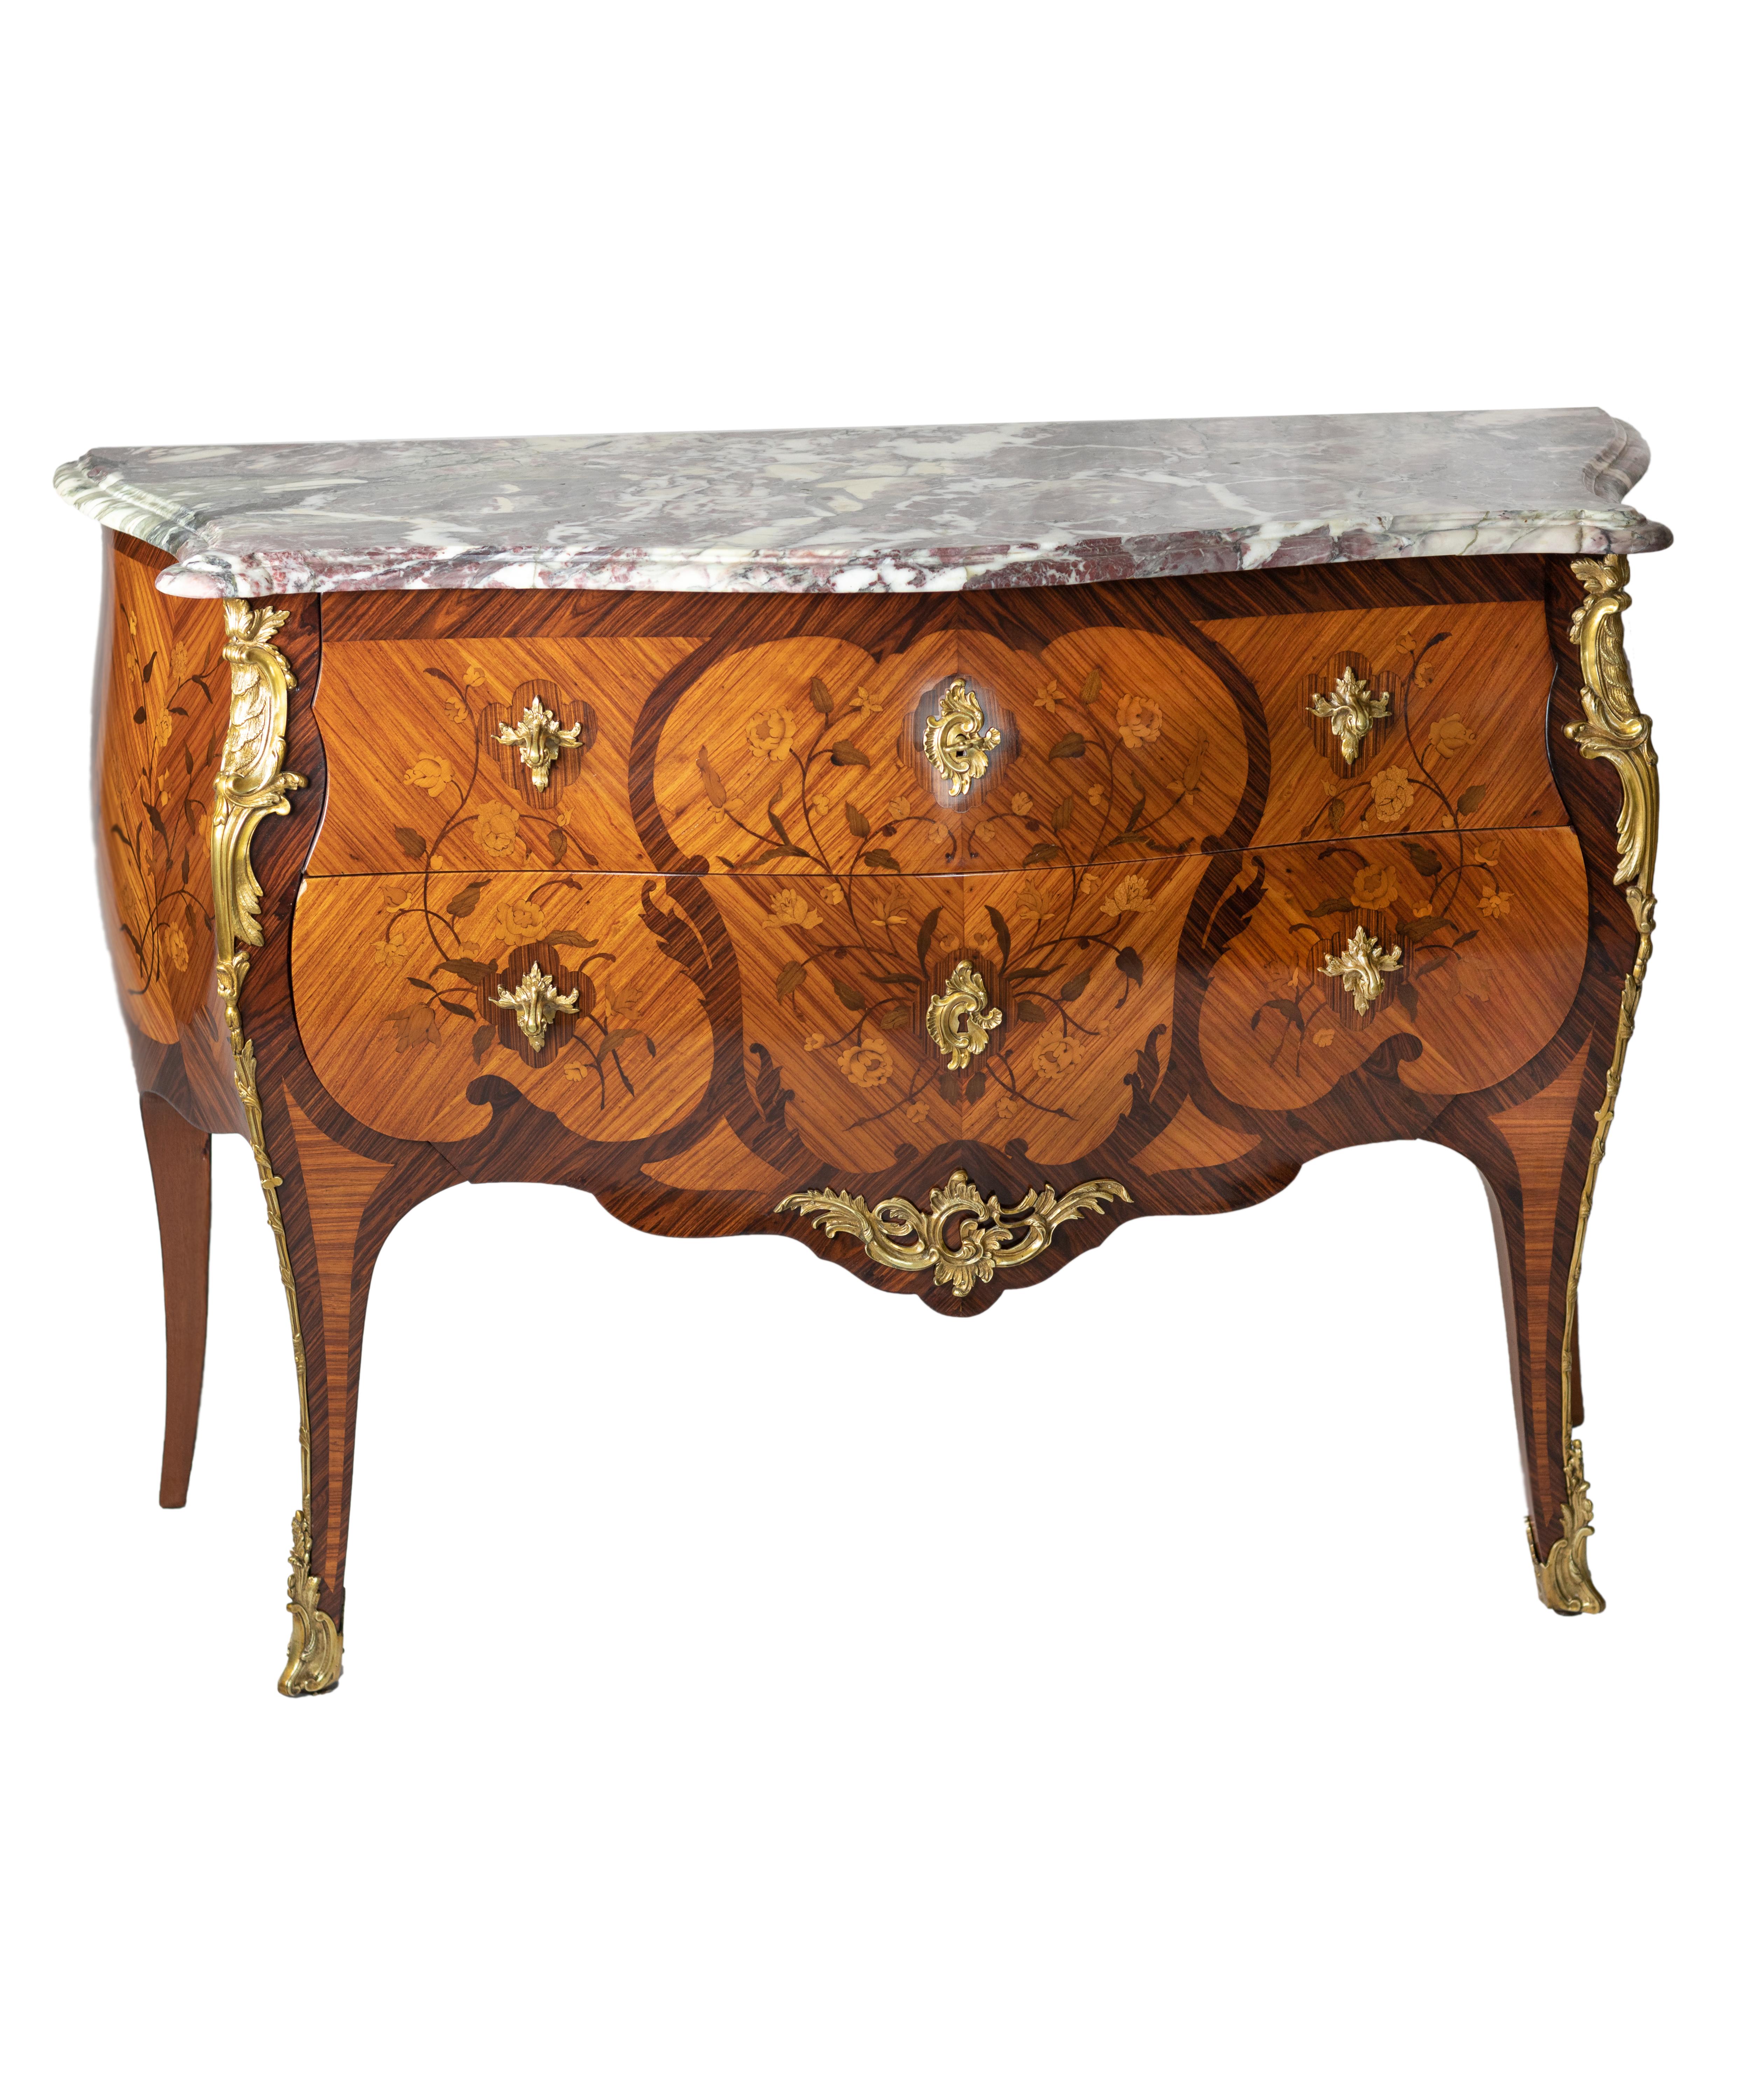 Rosewood 18th Century  Commode by the great Artist Mathieu Criaerd with gilded bronze mounts. 
Devonian of the Ardennes Marble Top. 
Rare Example.
Chest of drawers with curved front opening with two drawers without crossbar. 
Louis XV